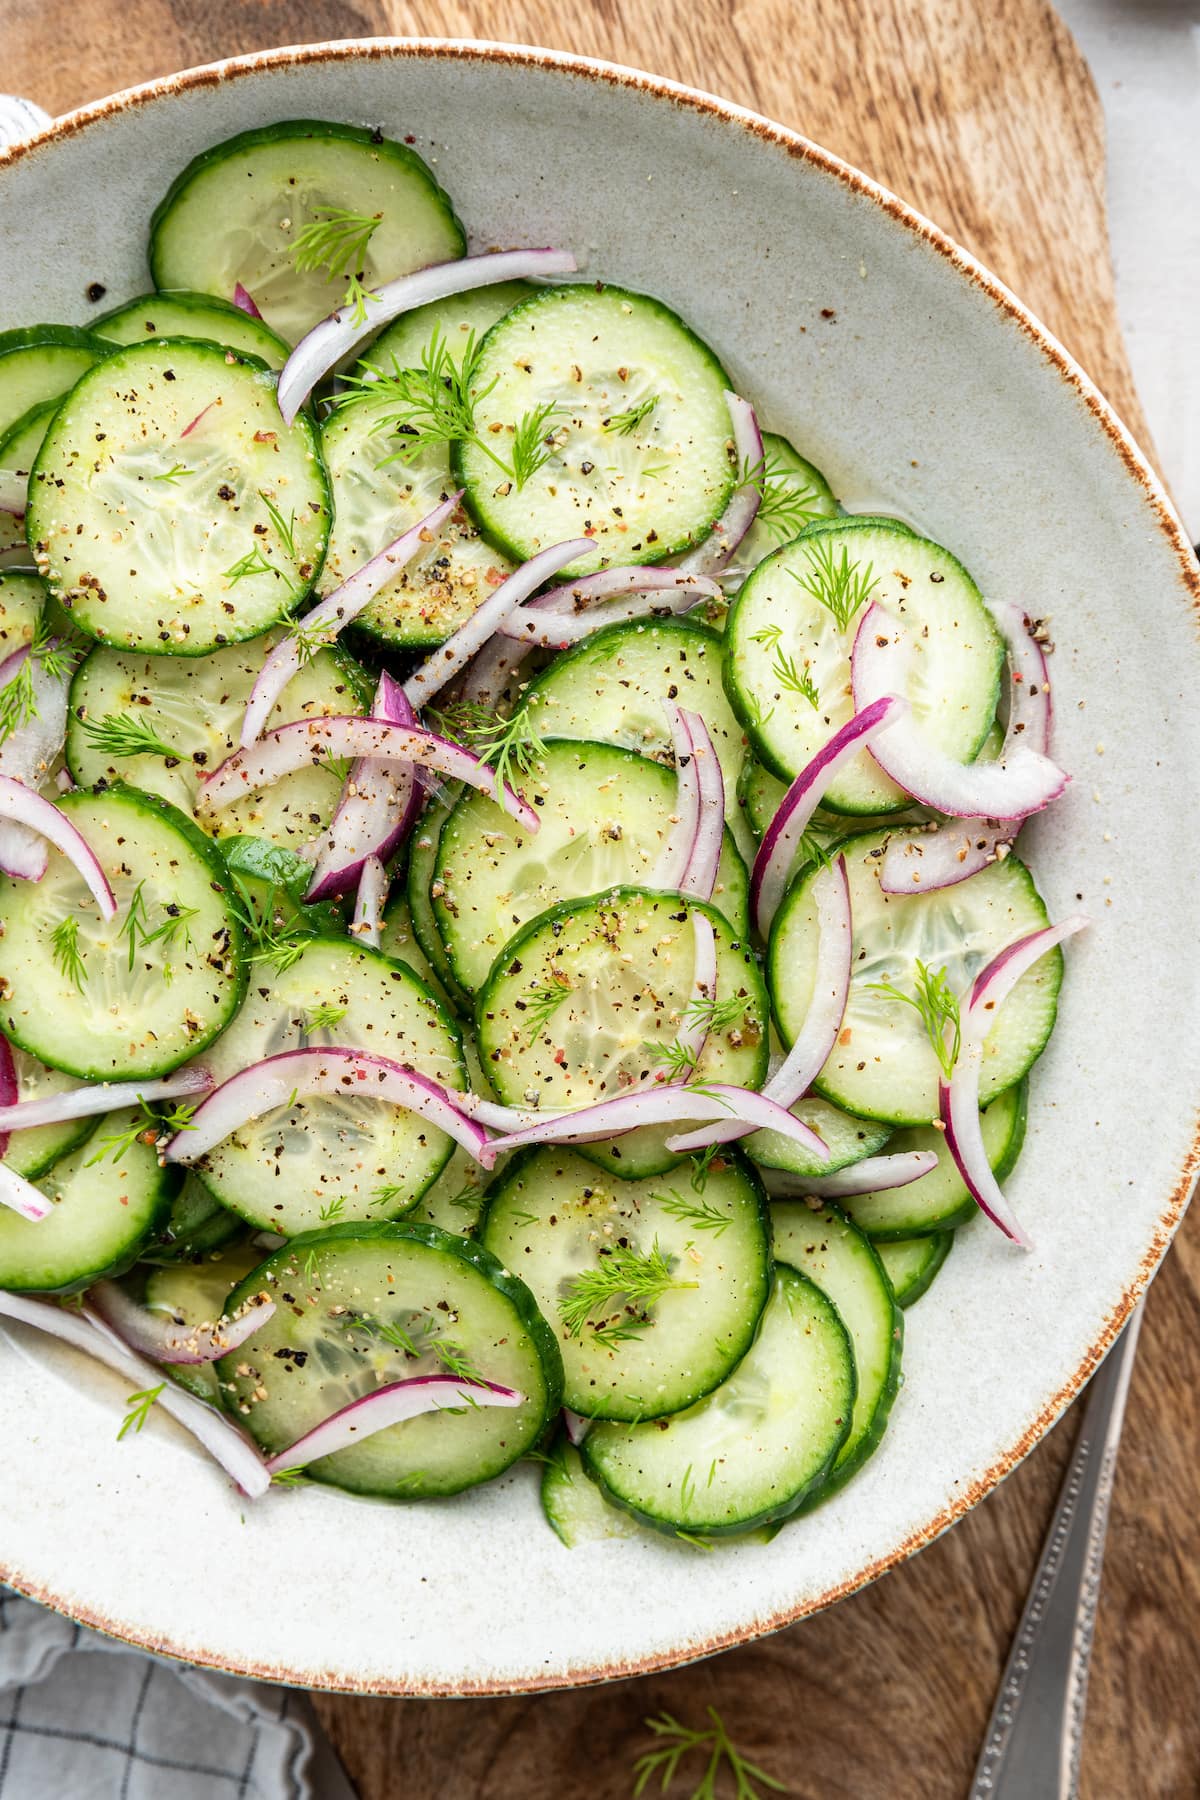 A cucumber salad in a white bowl with sliced cucumbers, red onion, and a vinaigrette.